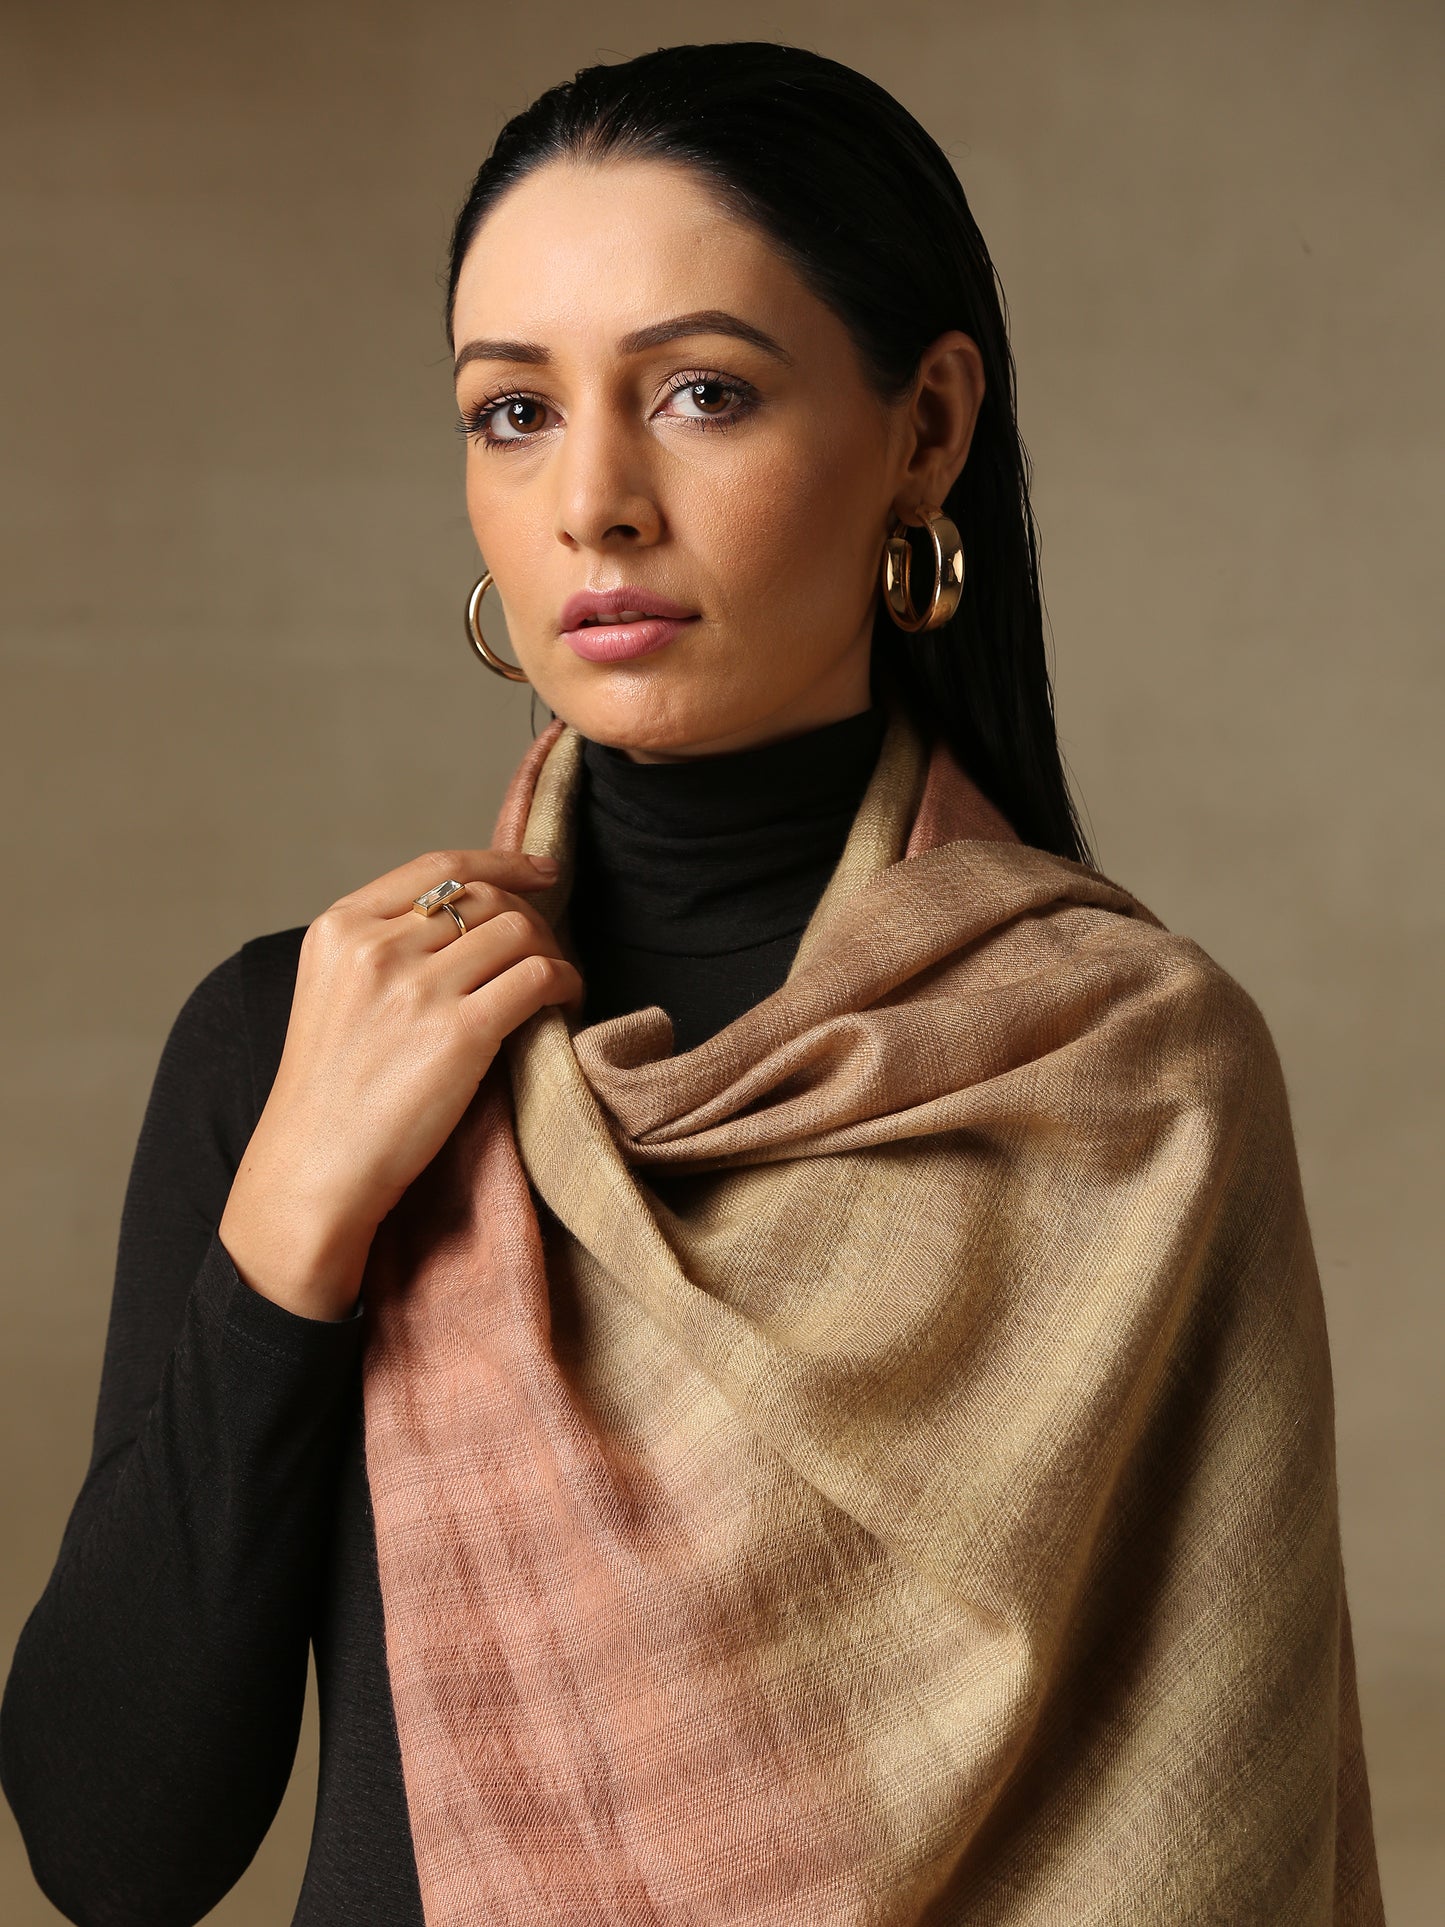 Model is wearing pashmina ombre in self weave stole in colours of blush pink and fawn.